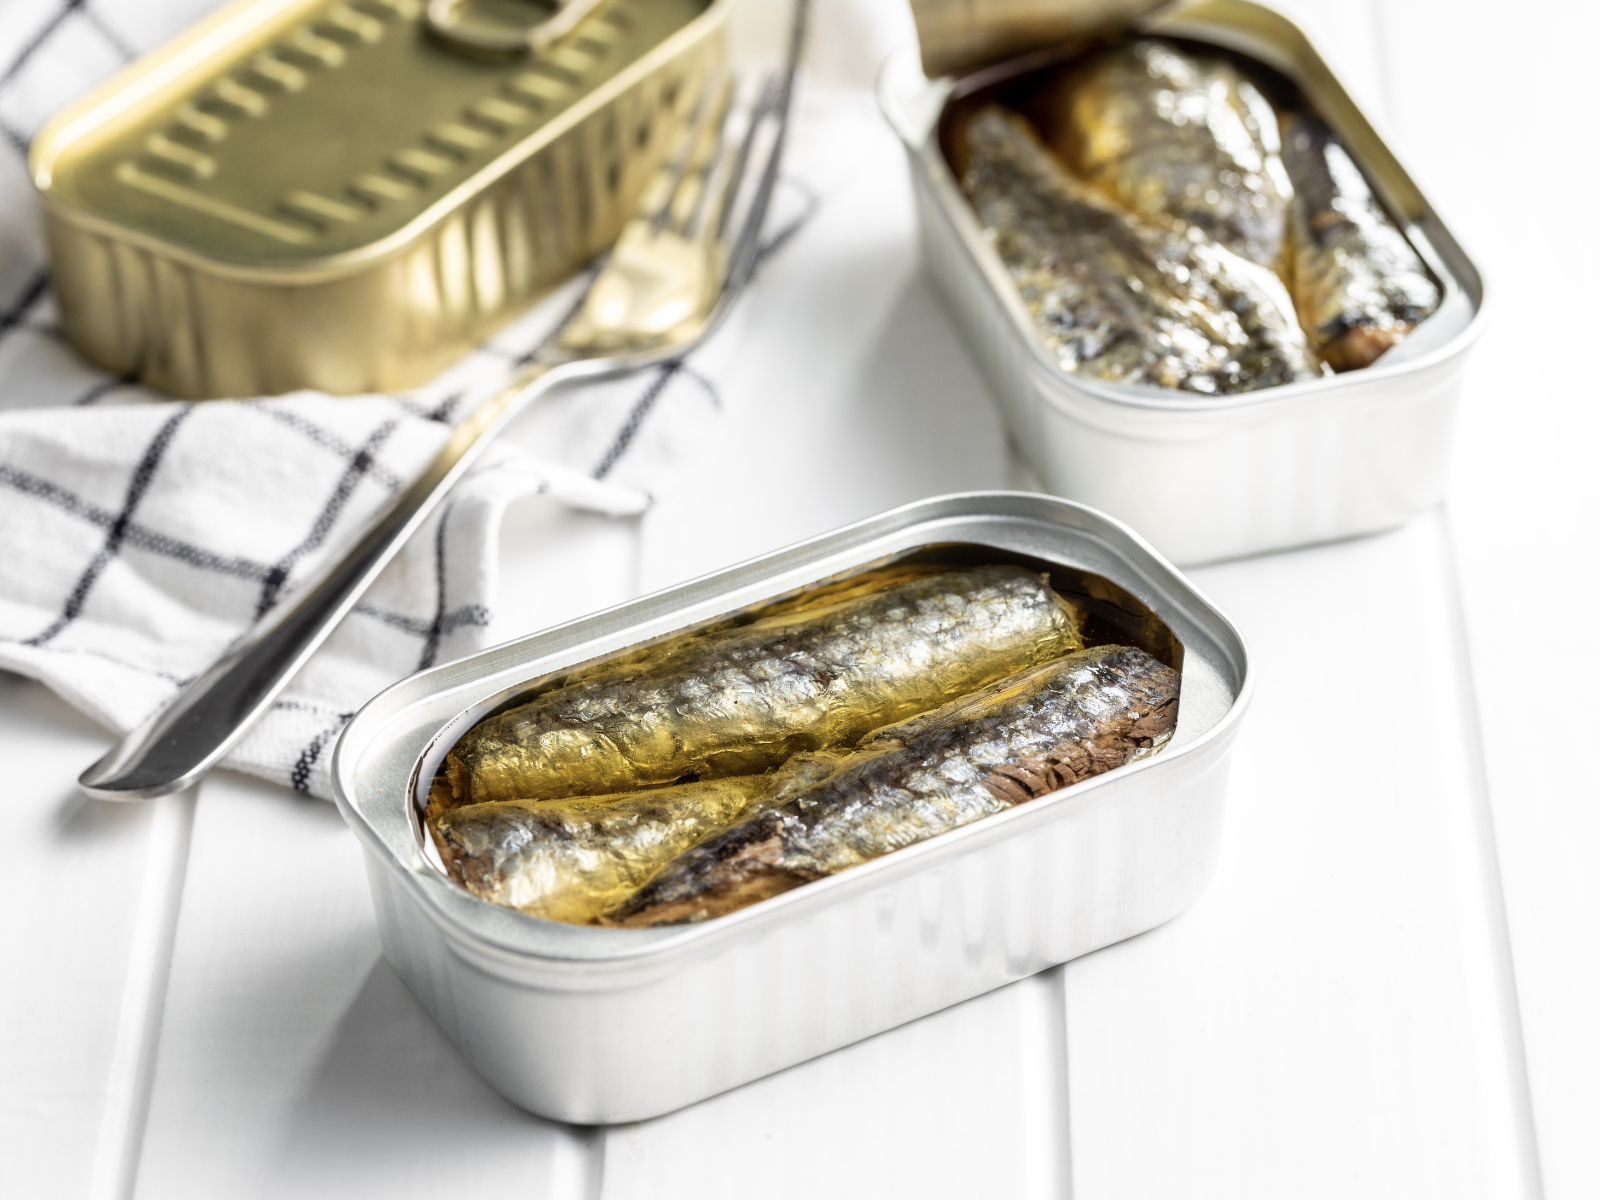 opened cans of sardines